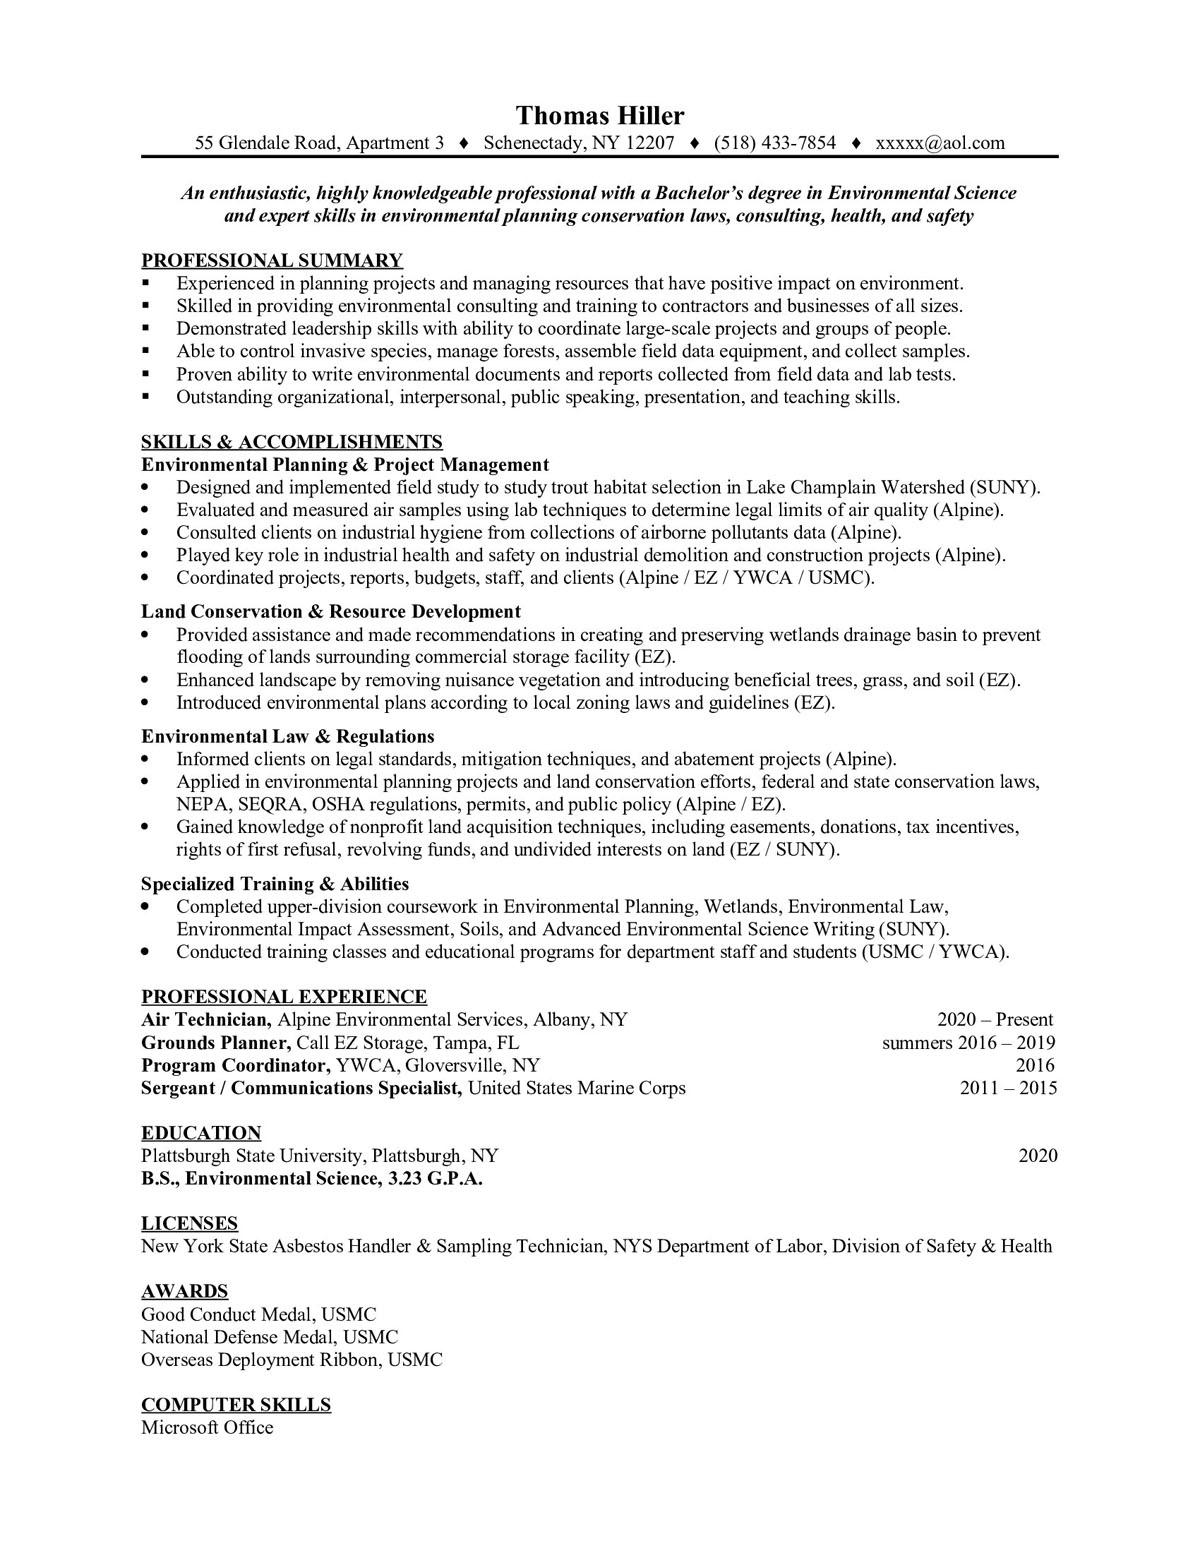 Sample resume: Environmental Science, Entry Level, Functional